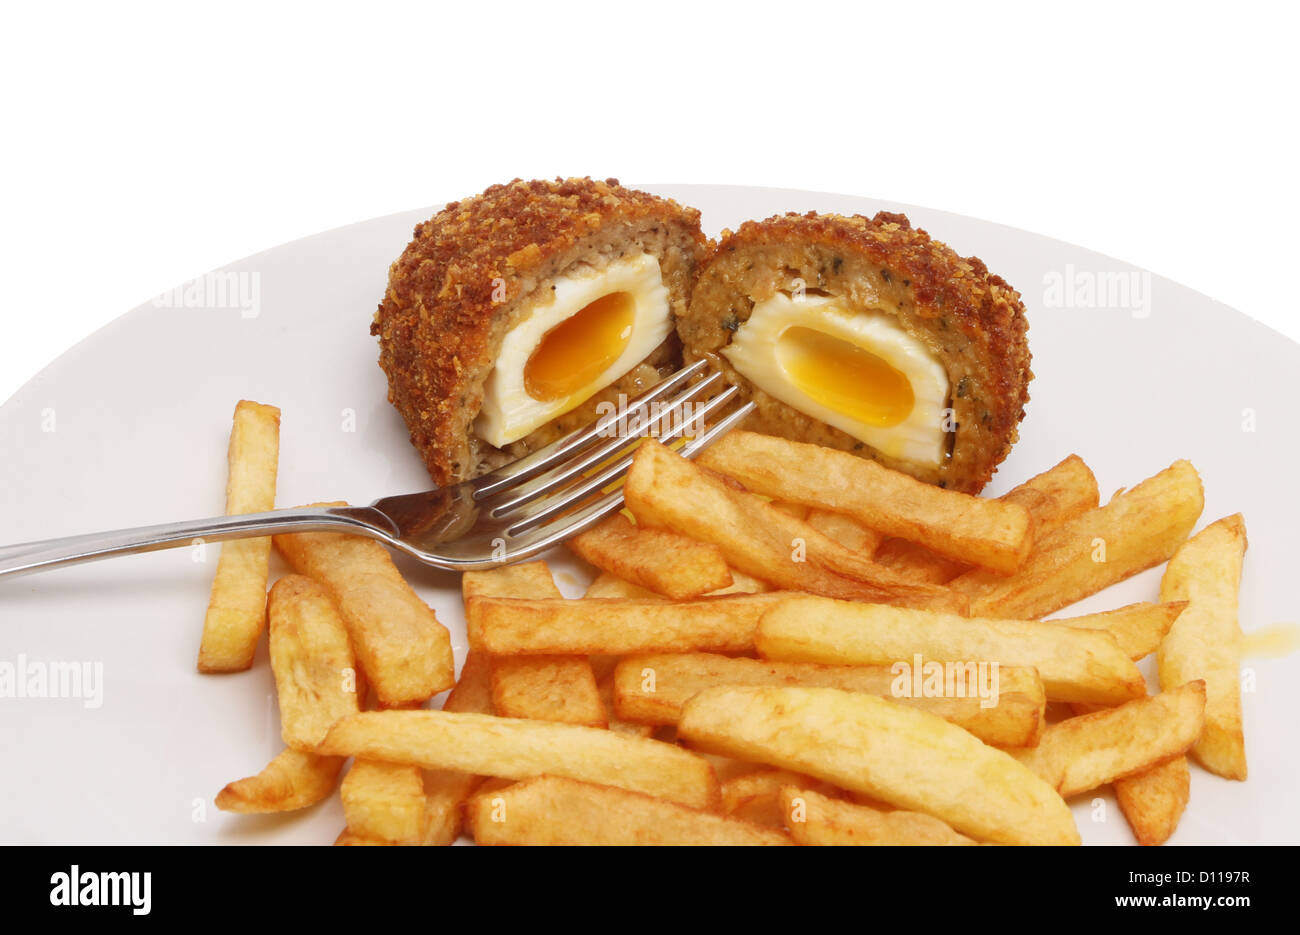 Runny Scotch egg and French fries on a plate with a fork Stock Photo